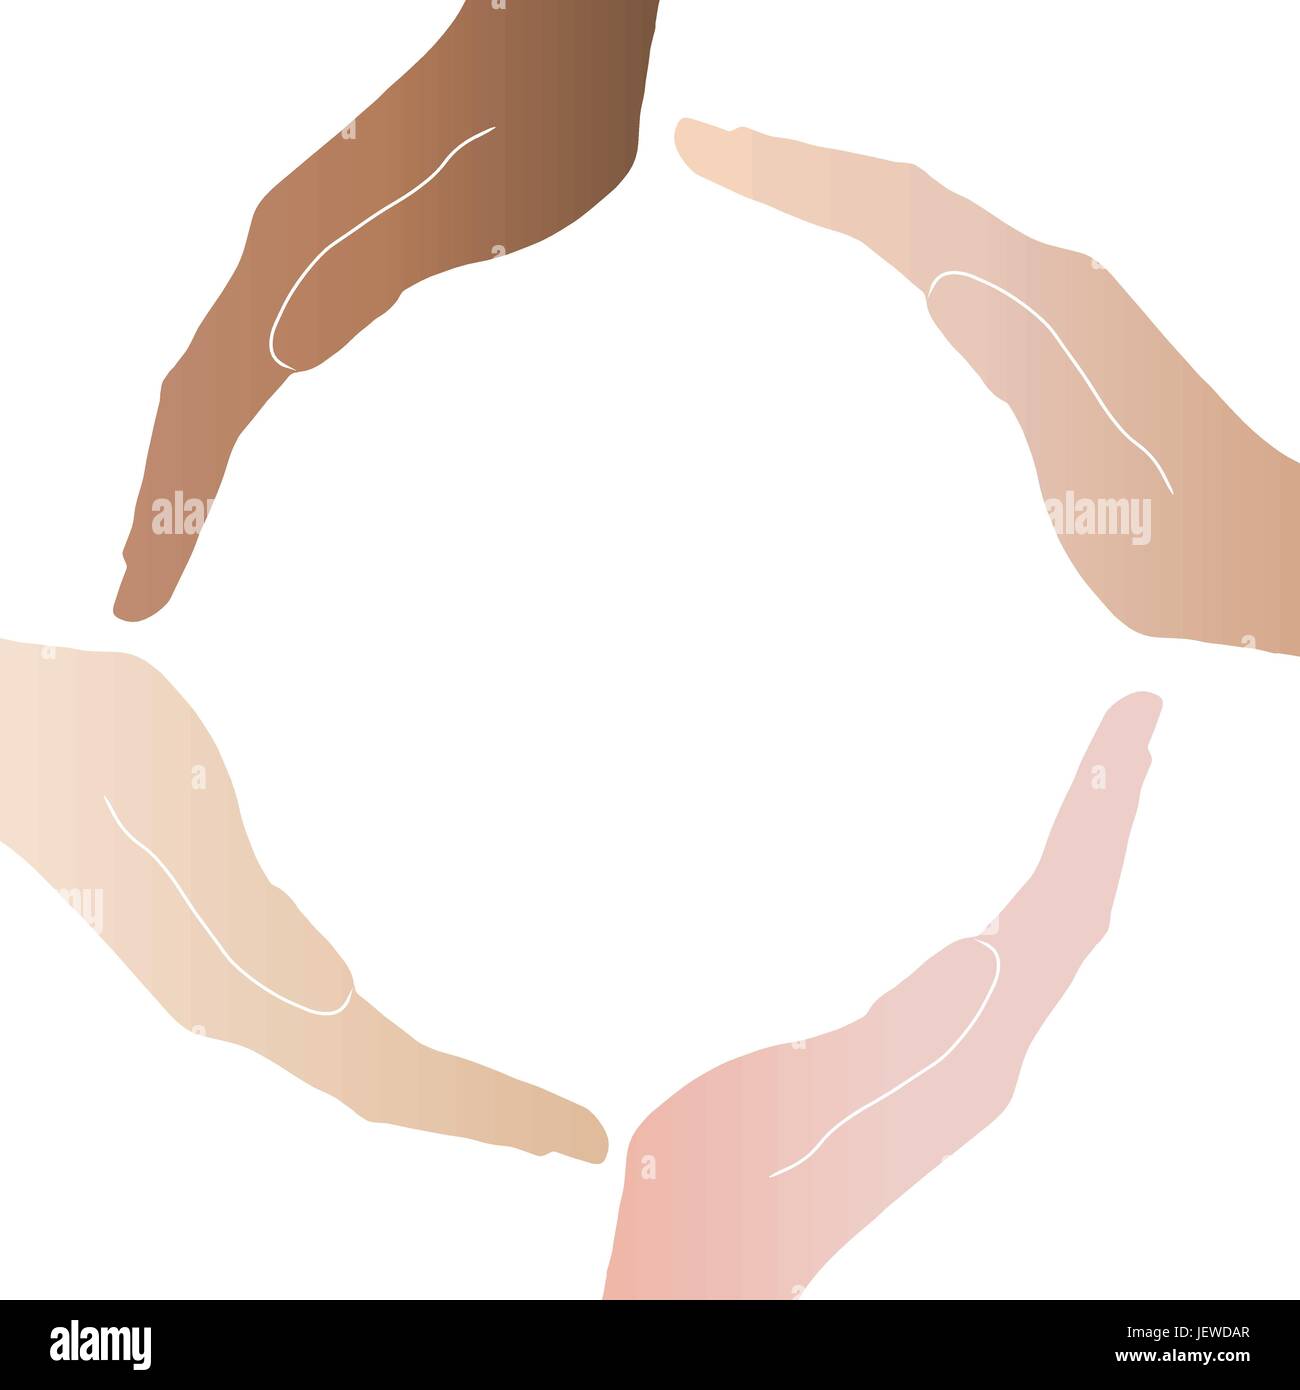 colour of the skin certain Stock Vector